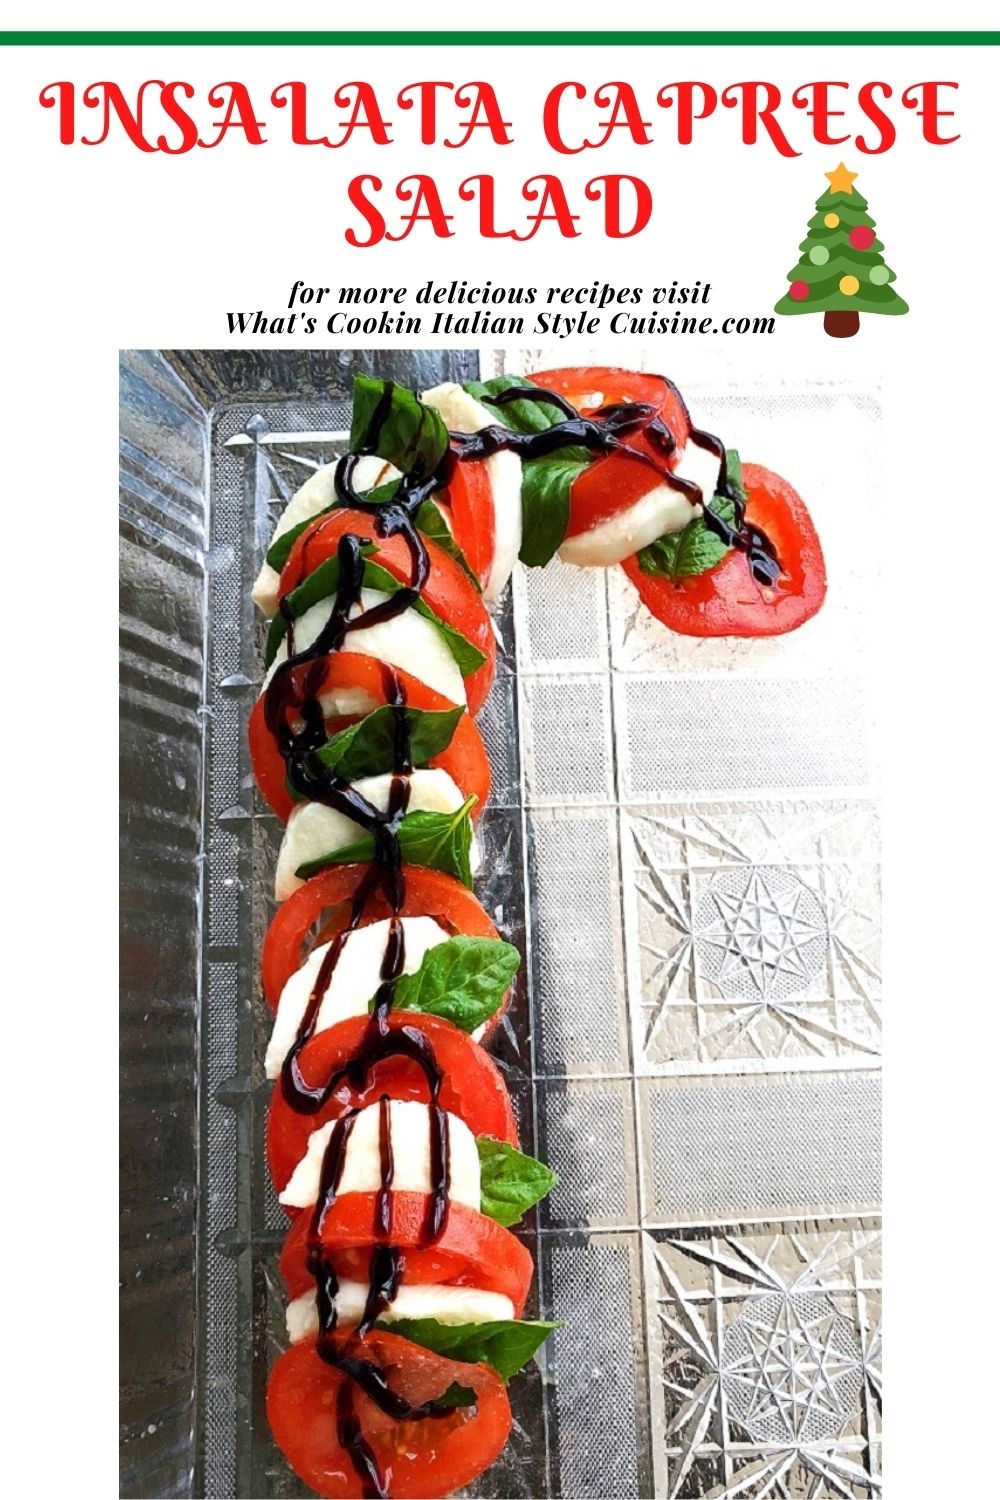 this is a  Pin for later candy cane shaped tomato caprese salad with balsamic vinegar drizzled on top